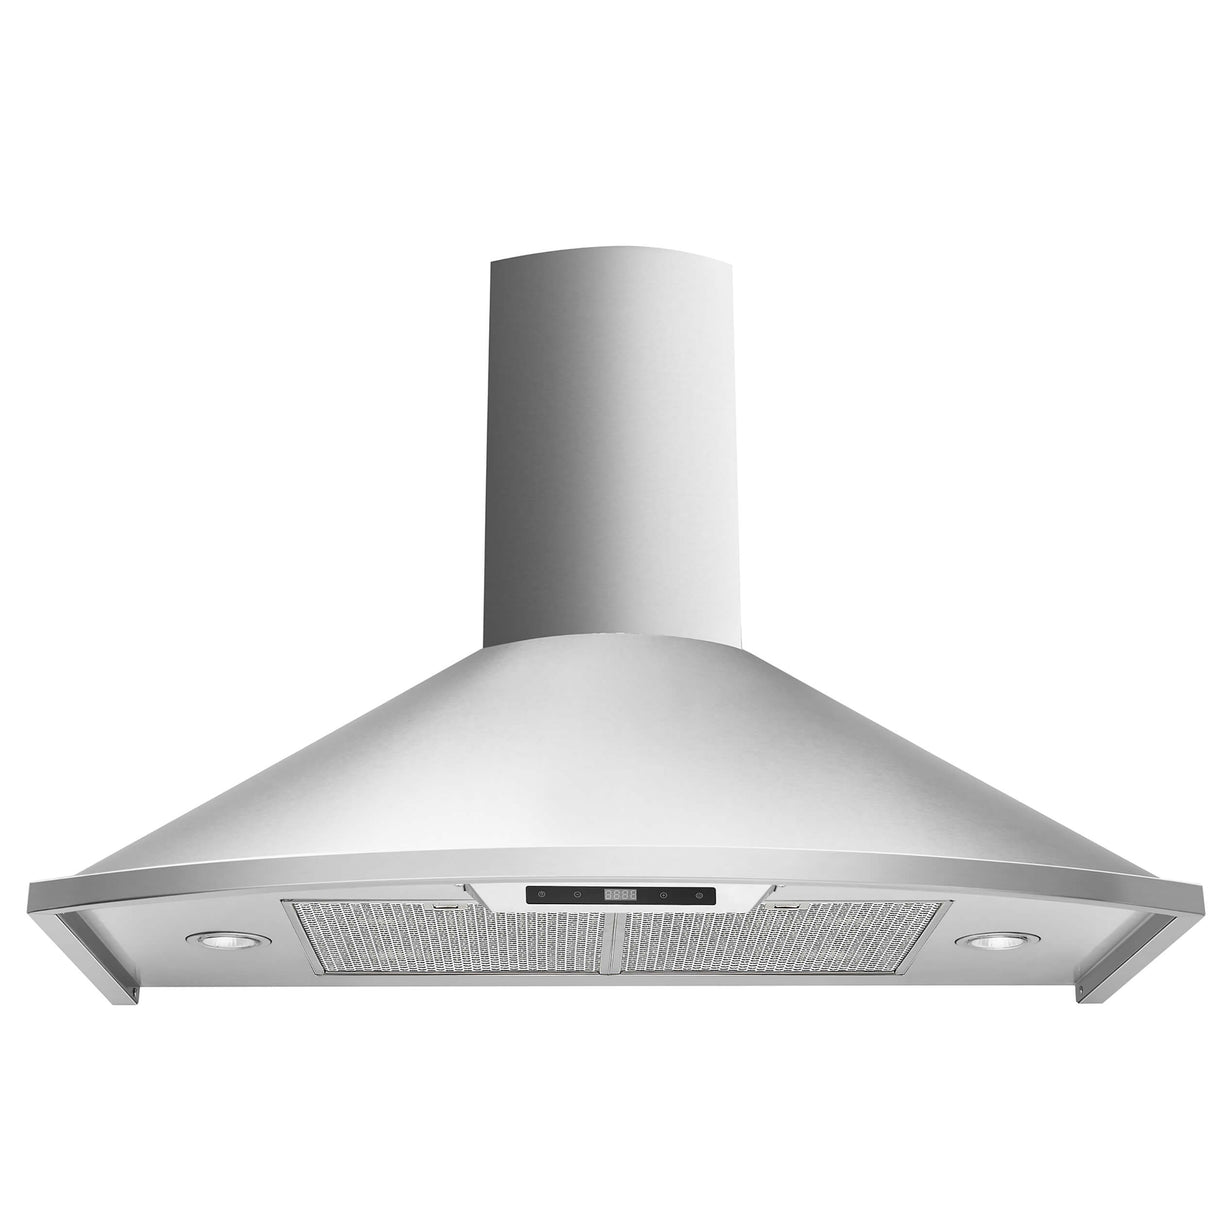 Forno 30-Inch Campobasso Wall Mount Range Hood in Stainless Steel with 450 CFM Motor (FRHWM5010-30)